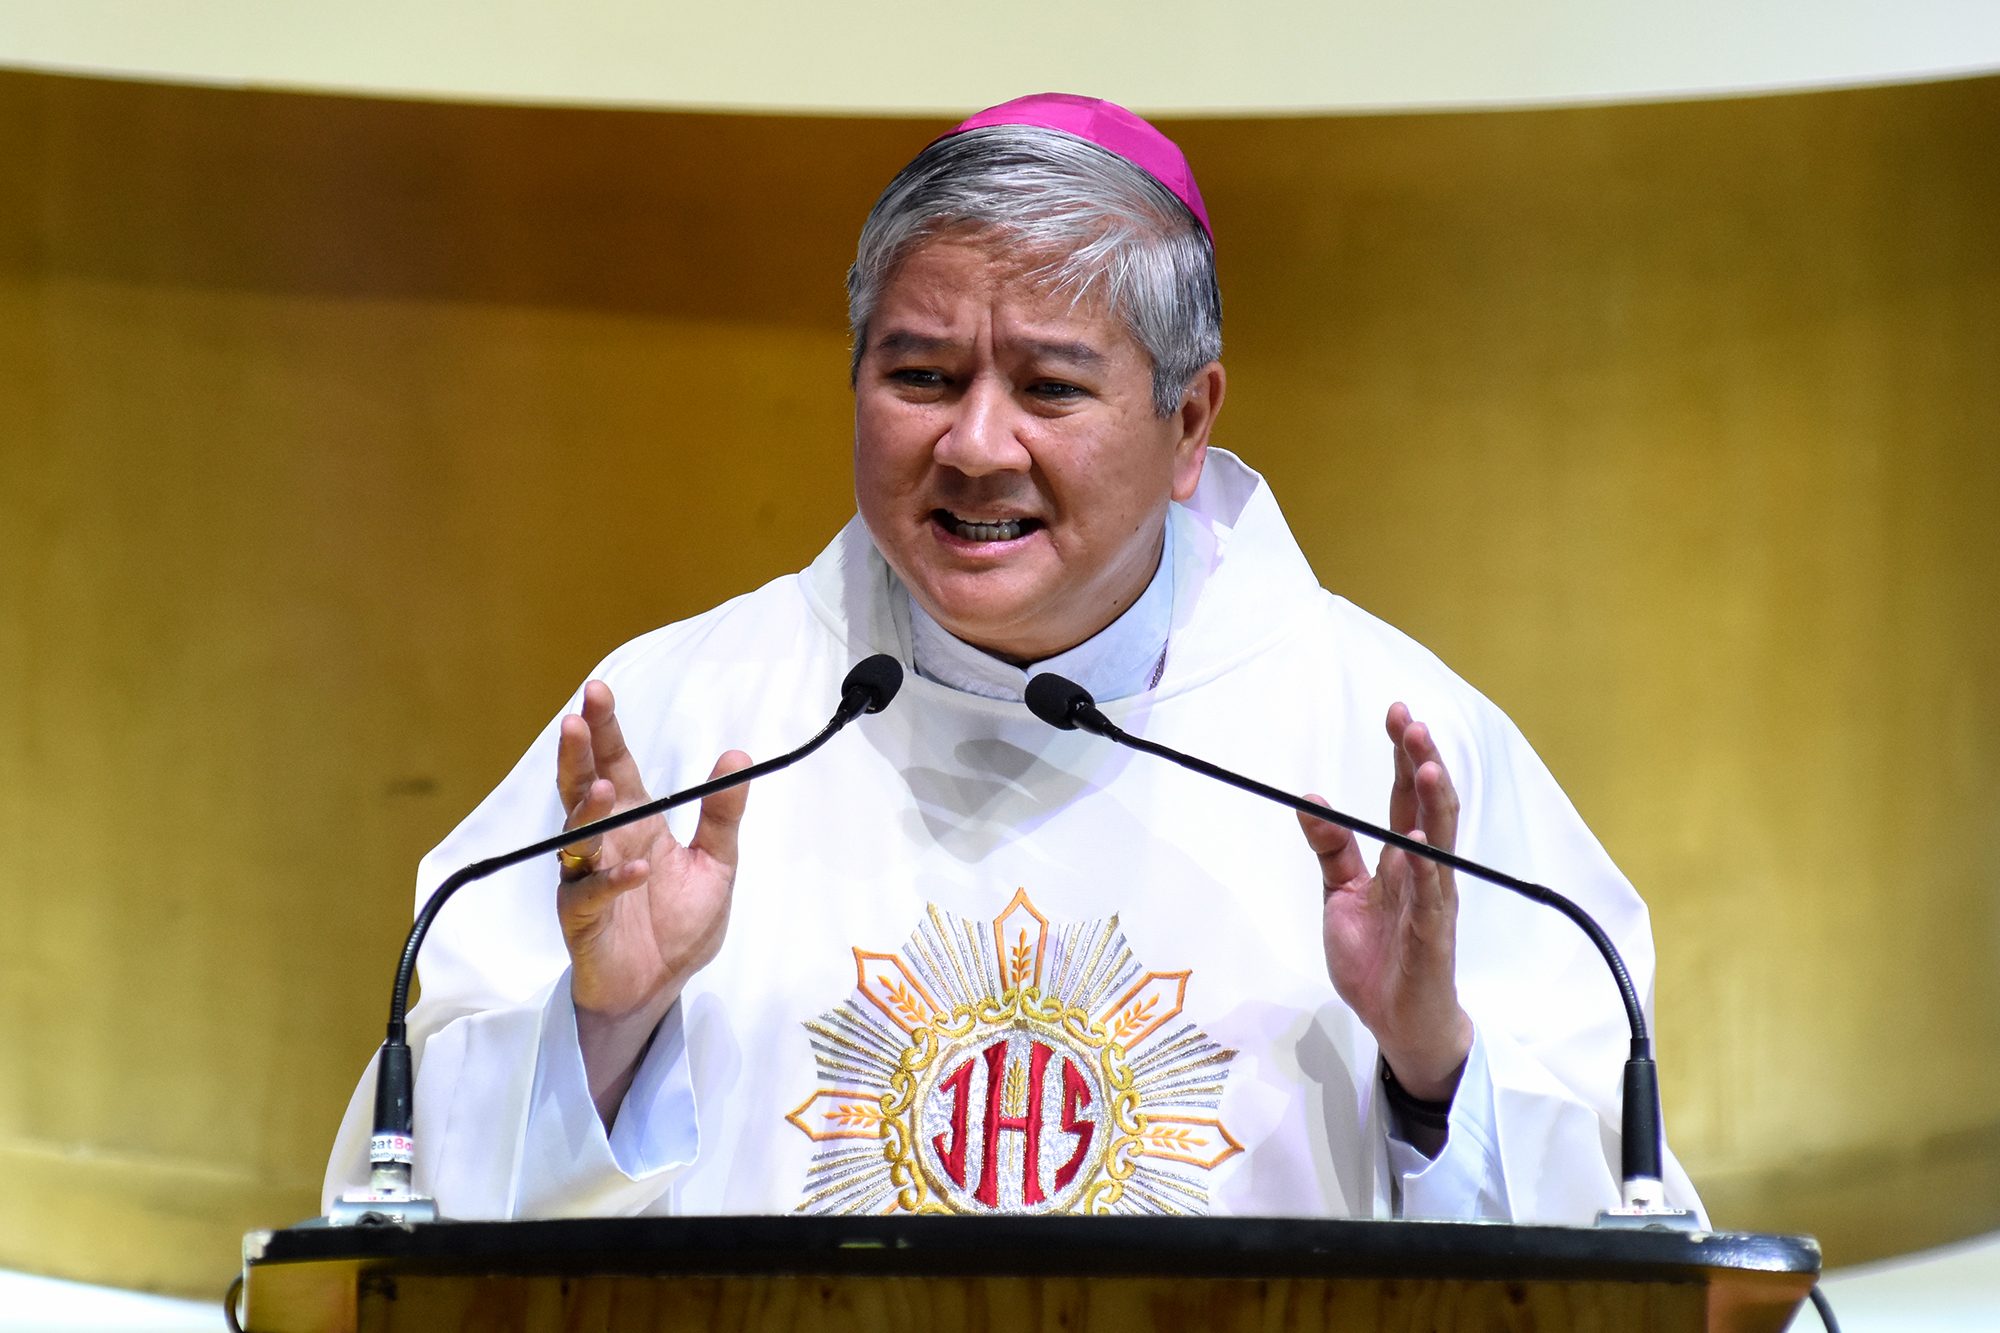 DEATH PENALTY. Lingayen-Dagupan Archbishop Socrates Villegas, president of the Catholic Bishops' Conference of the Philippines, opposes the capital punishment. File photo by Angie de Silva/Rappler  